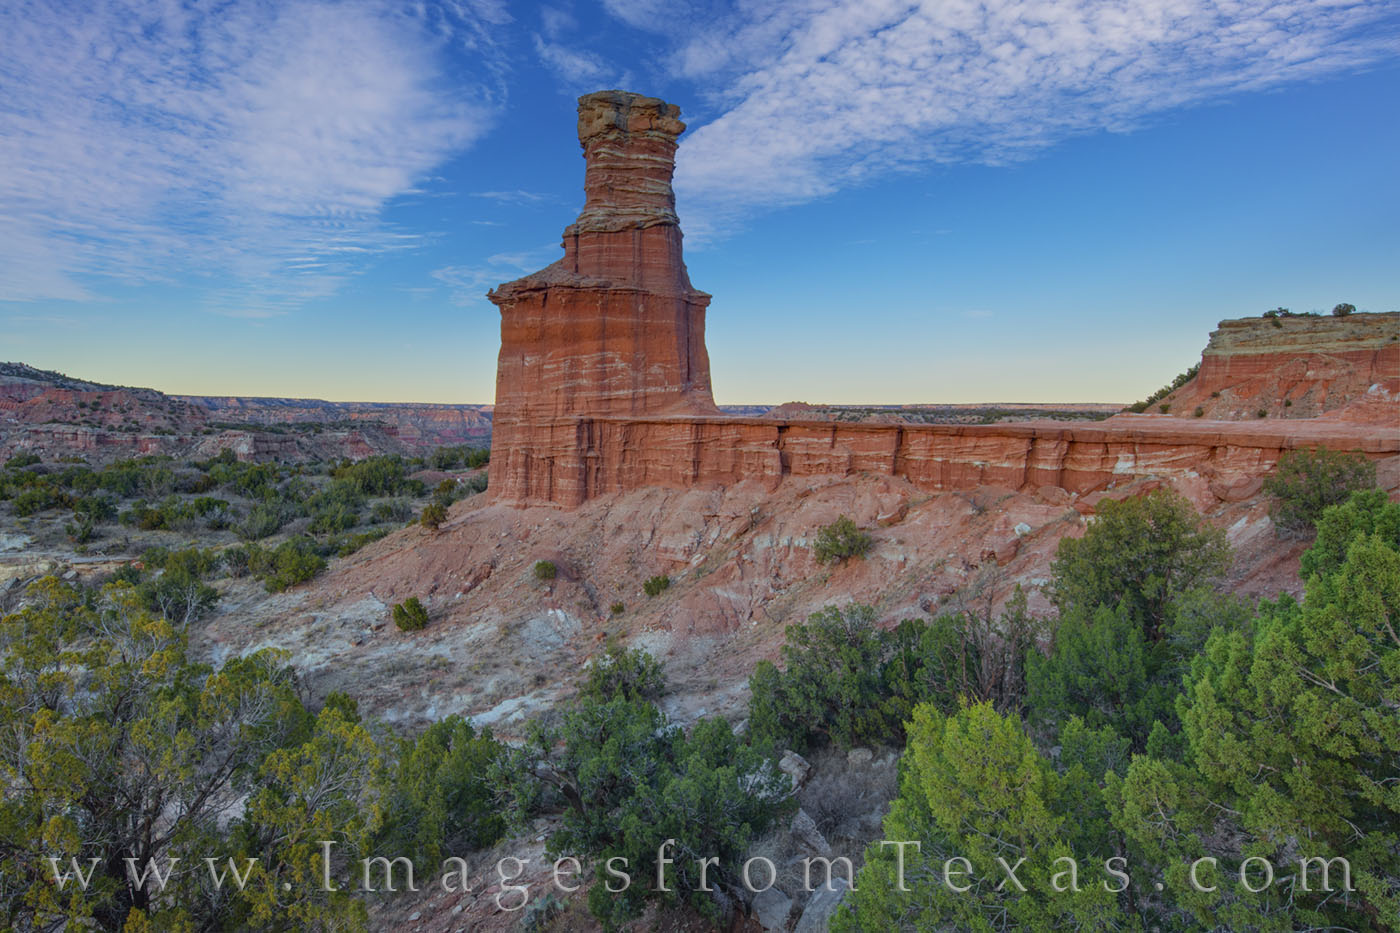 The iconic Lighthouse of Palo Duro Canyon is an easy 6 mile round trip walk from the trailhead. The views along they way are...